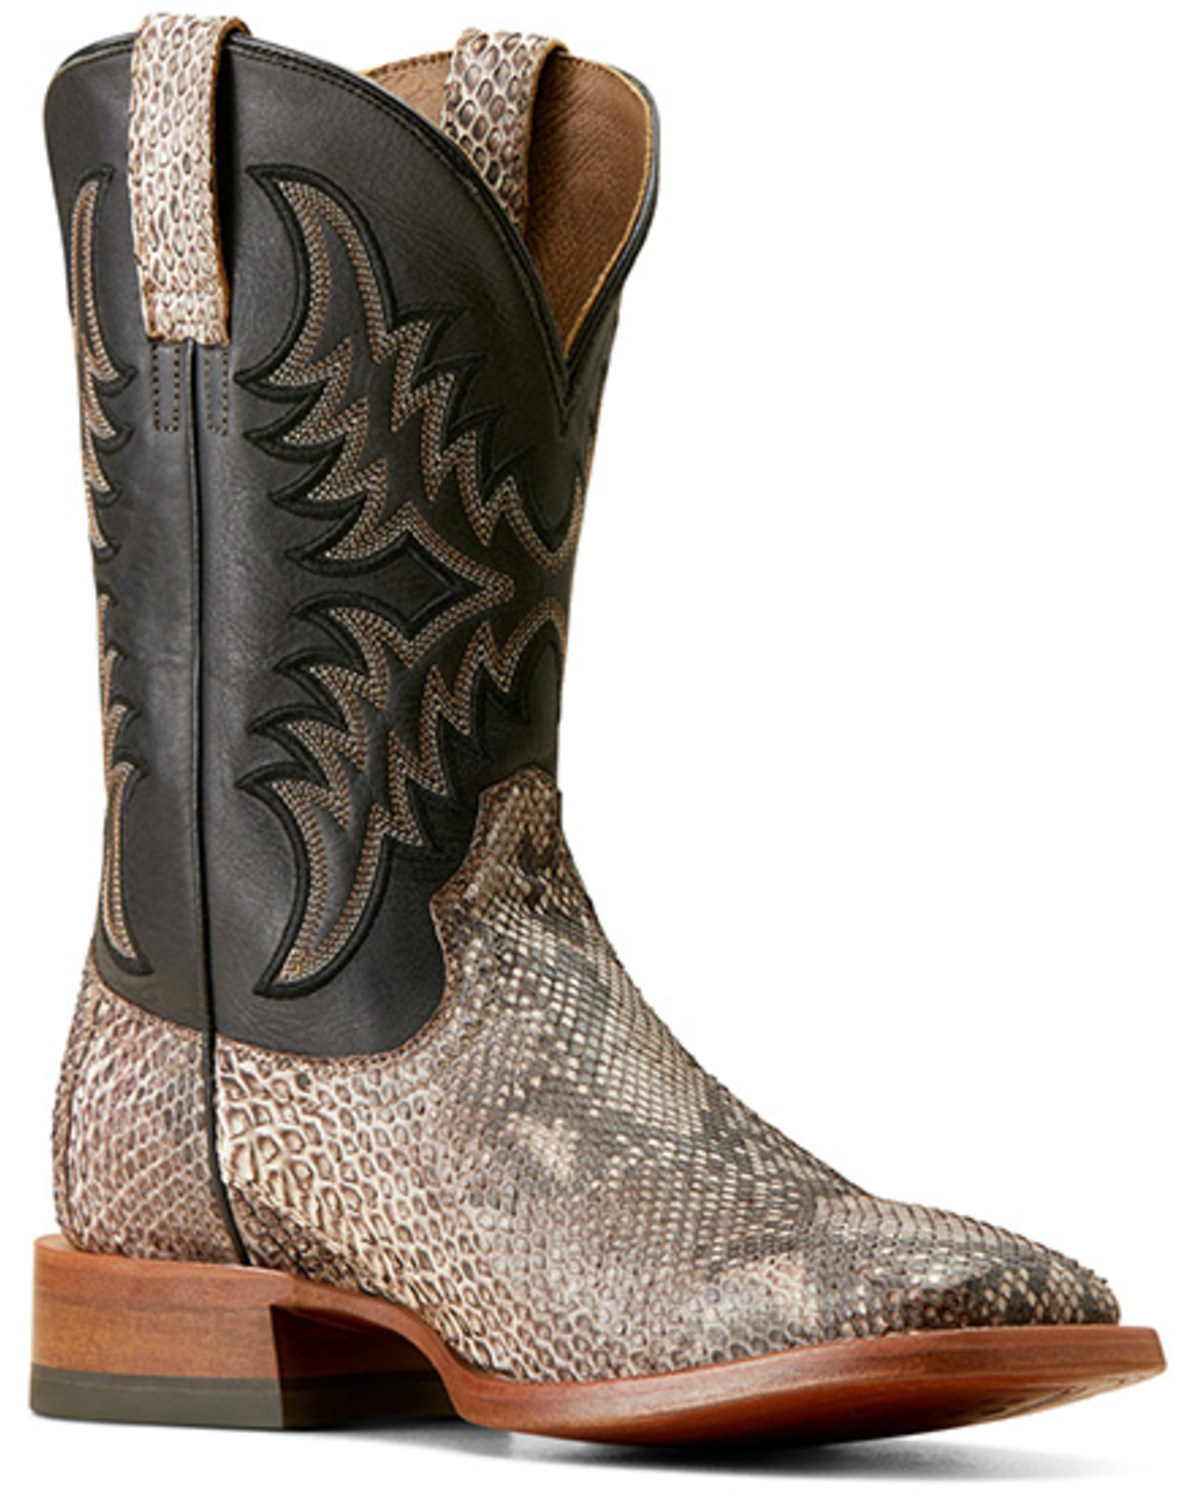 Ariat Men's Dry Gulch Exotic Python Western Boots - Broad Square Toe